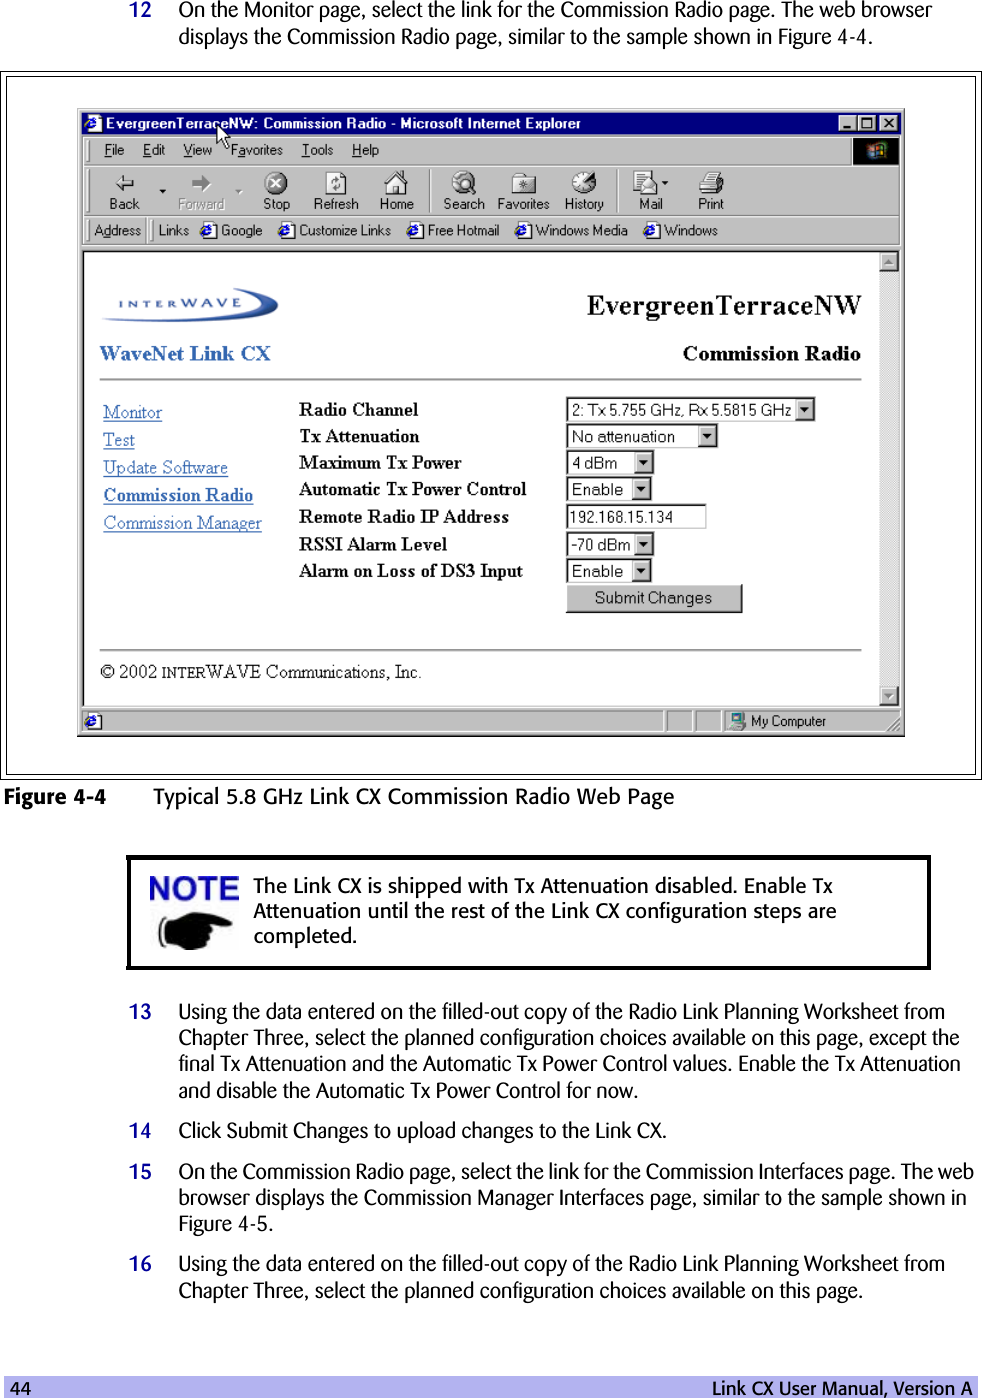 44   Link CX User Manual, Version A12 On the Monitor page, select the link for the Commission Radio page. The web browser displays the Commission Radio page, similar to the sample shown in Figure 4-4.13 Using the data entered on the filled-out copy of the Radio Link Planning Worksheet from Chapter Three, select the planned configuration choices available on this page, except the final Tx Attenuation and the Automatic Tx Power Control values. Enable the Tx Attenuation and disable the Automatic Tx Power Control for now. 14 Click Submit Changes to upload changes to the Link CX.15 On the Commission Radio page, select the link for the Commission Interfaces page. The web browser displays the Commission Manager Interfaces page, similar to the sample shown in Figure 4-5.16 Using the data entered on the filled-out copy of the Radio Link Planning Worksheet from Chapter Three, select the planned configuration choices available on this page.Figure 4-4 Typical 5.8 GHz Link CX Commission Radio Web PageThe Link CX is shipped with Tx Attenuation disabled. Enable Tx Attenuation until the rest of the Link CX configuration steps are completed.